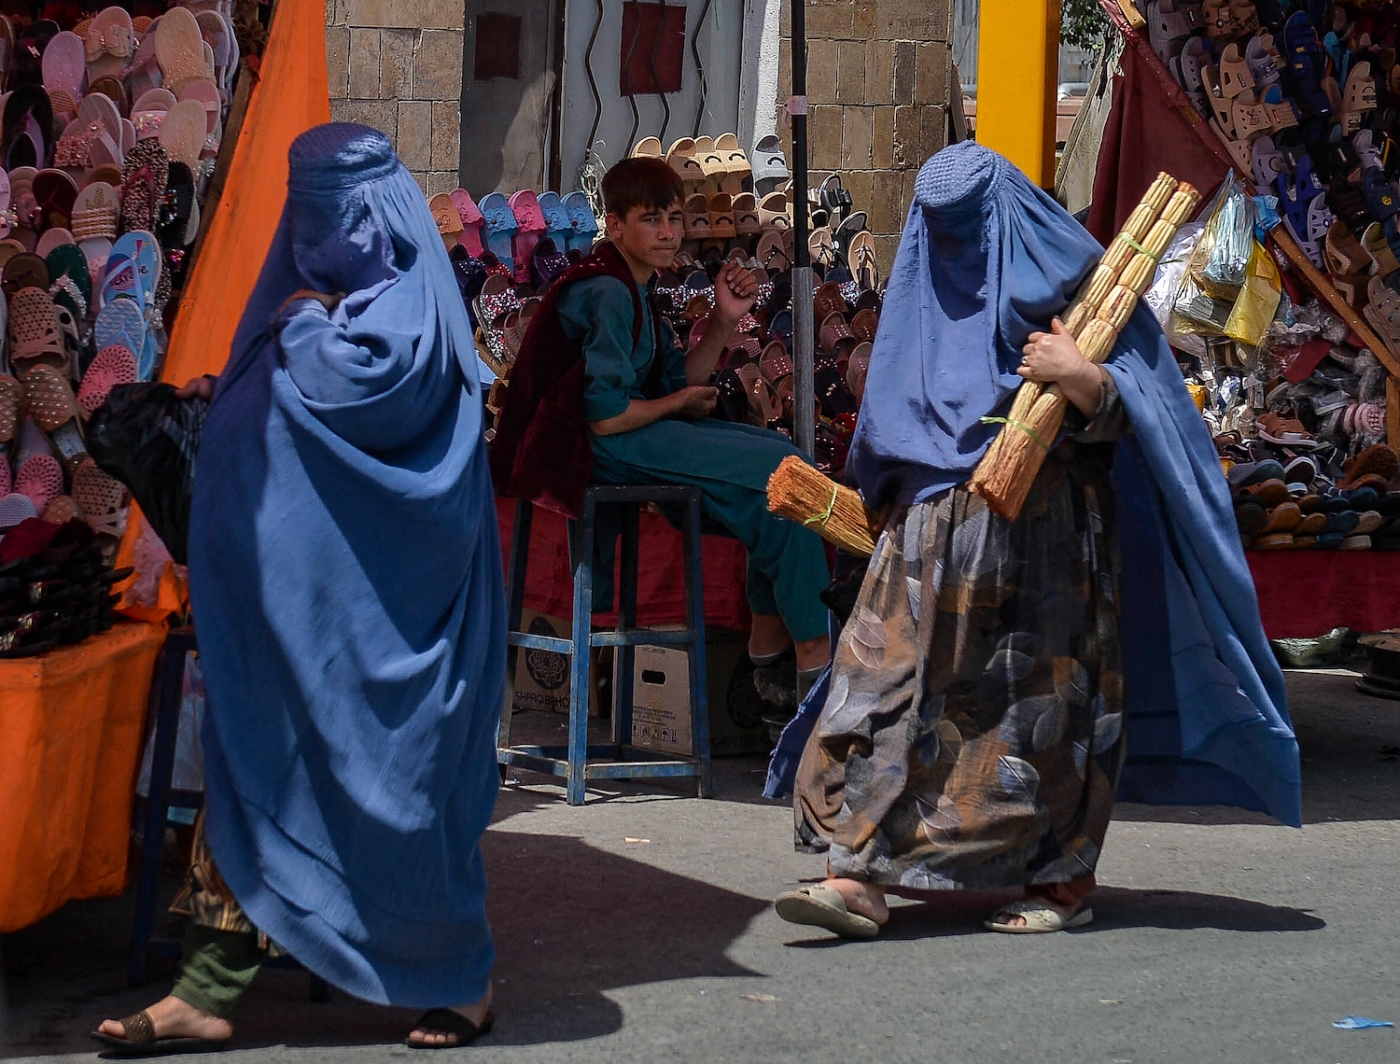 Women in burqa at market in Afghanistan after Taliban seized power